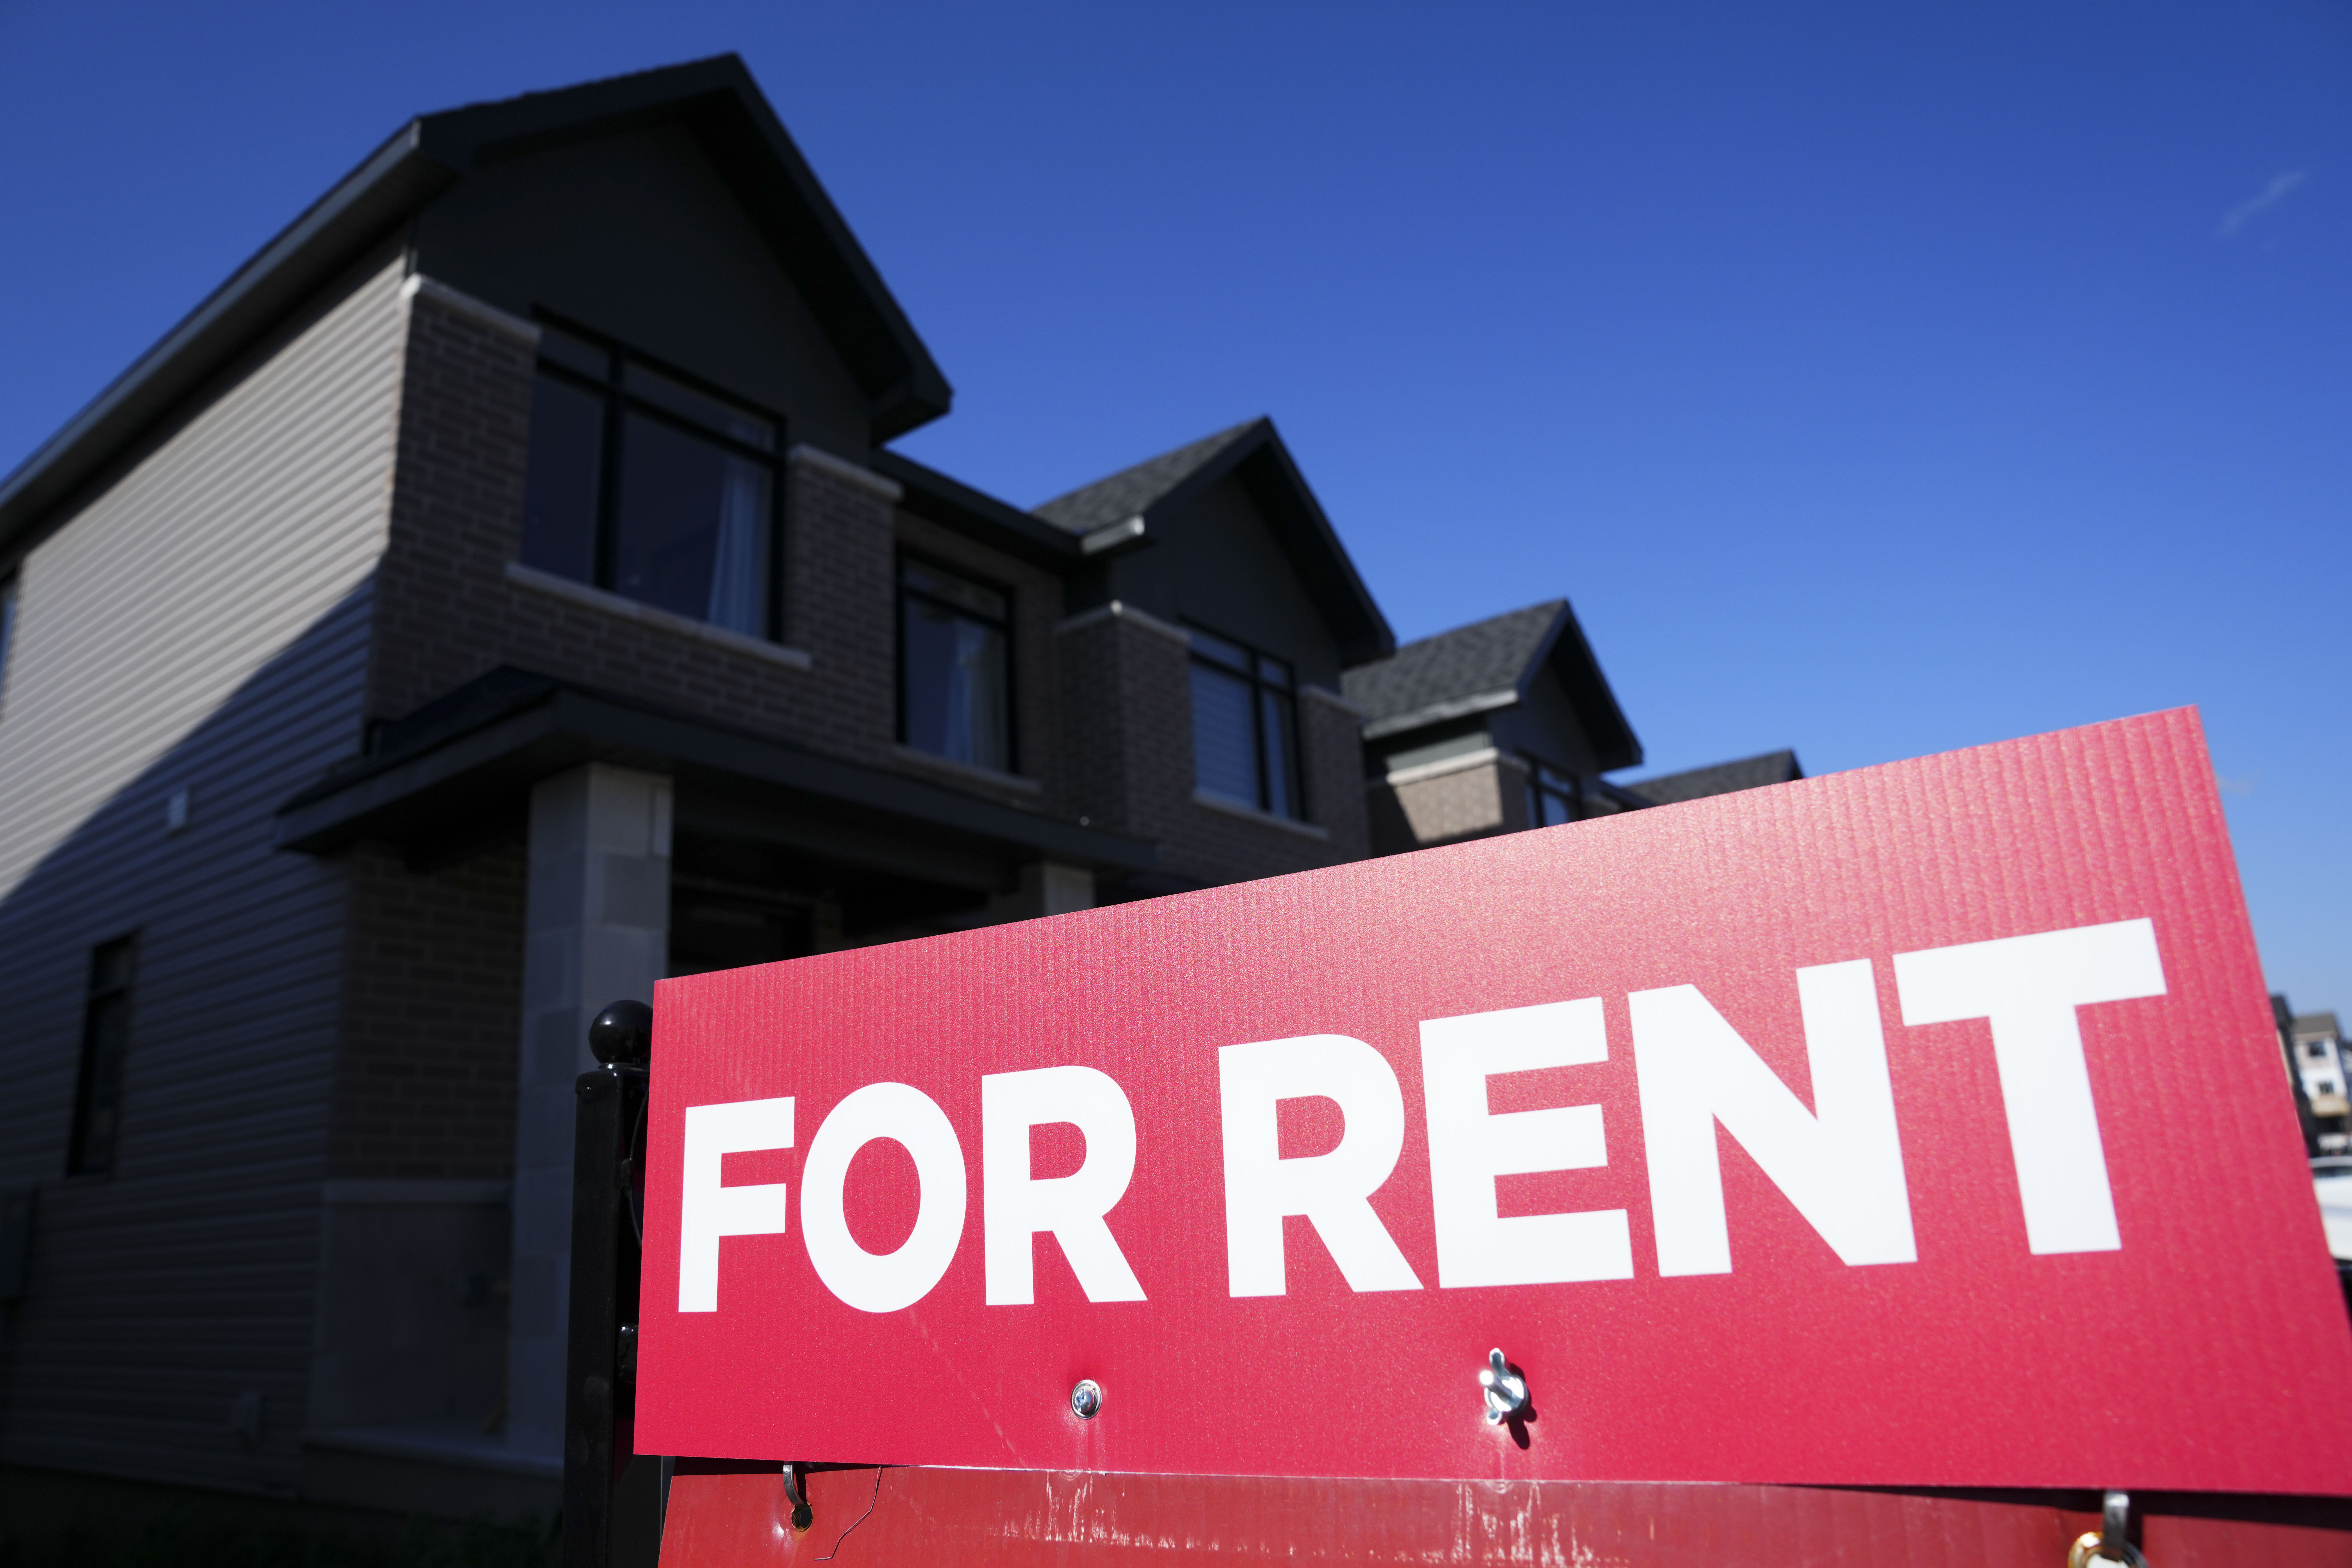 Low-income renters in Canada can apply for a one-time payment of